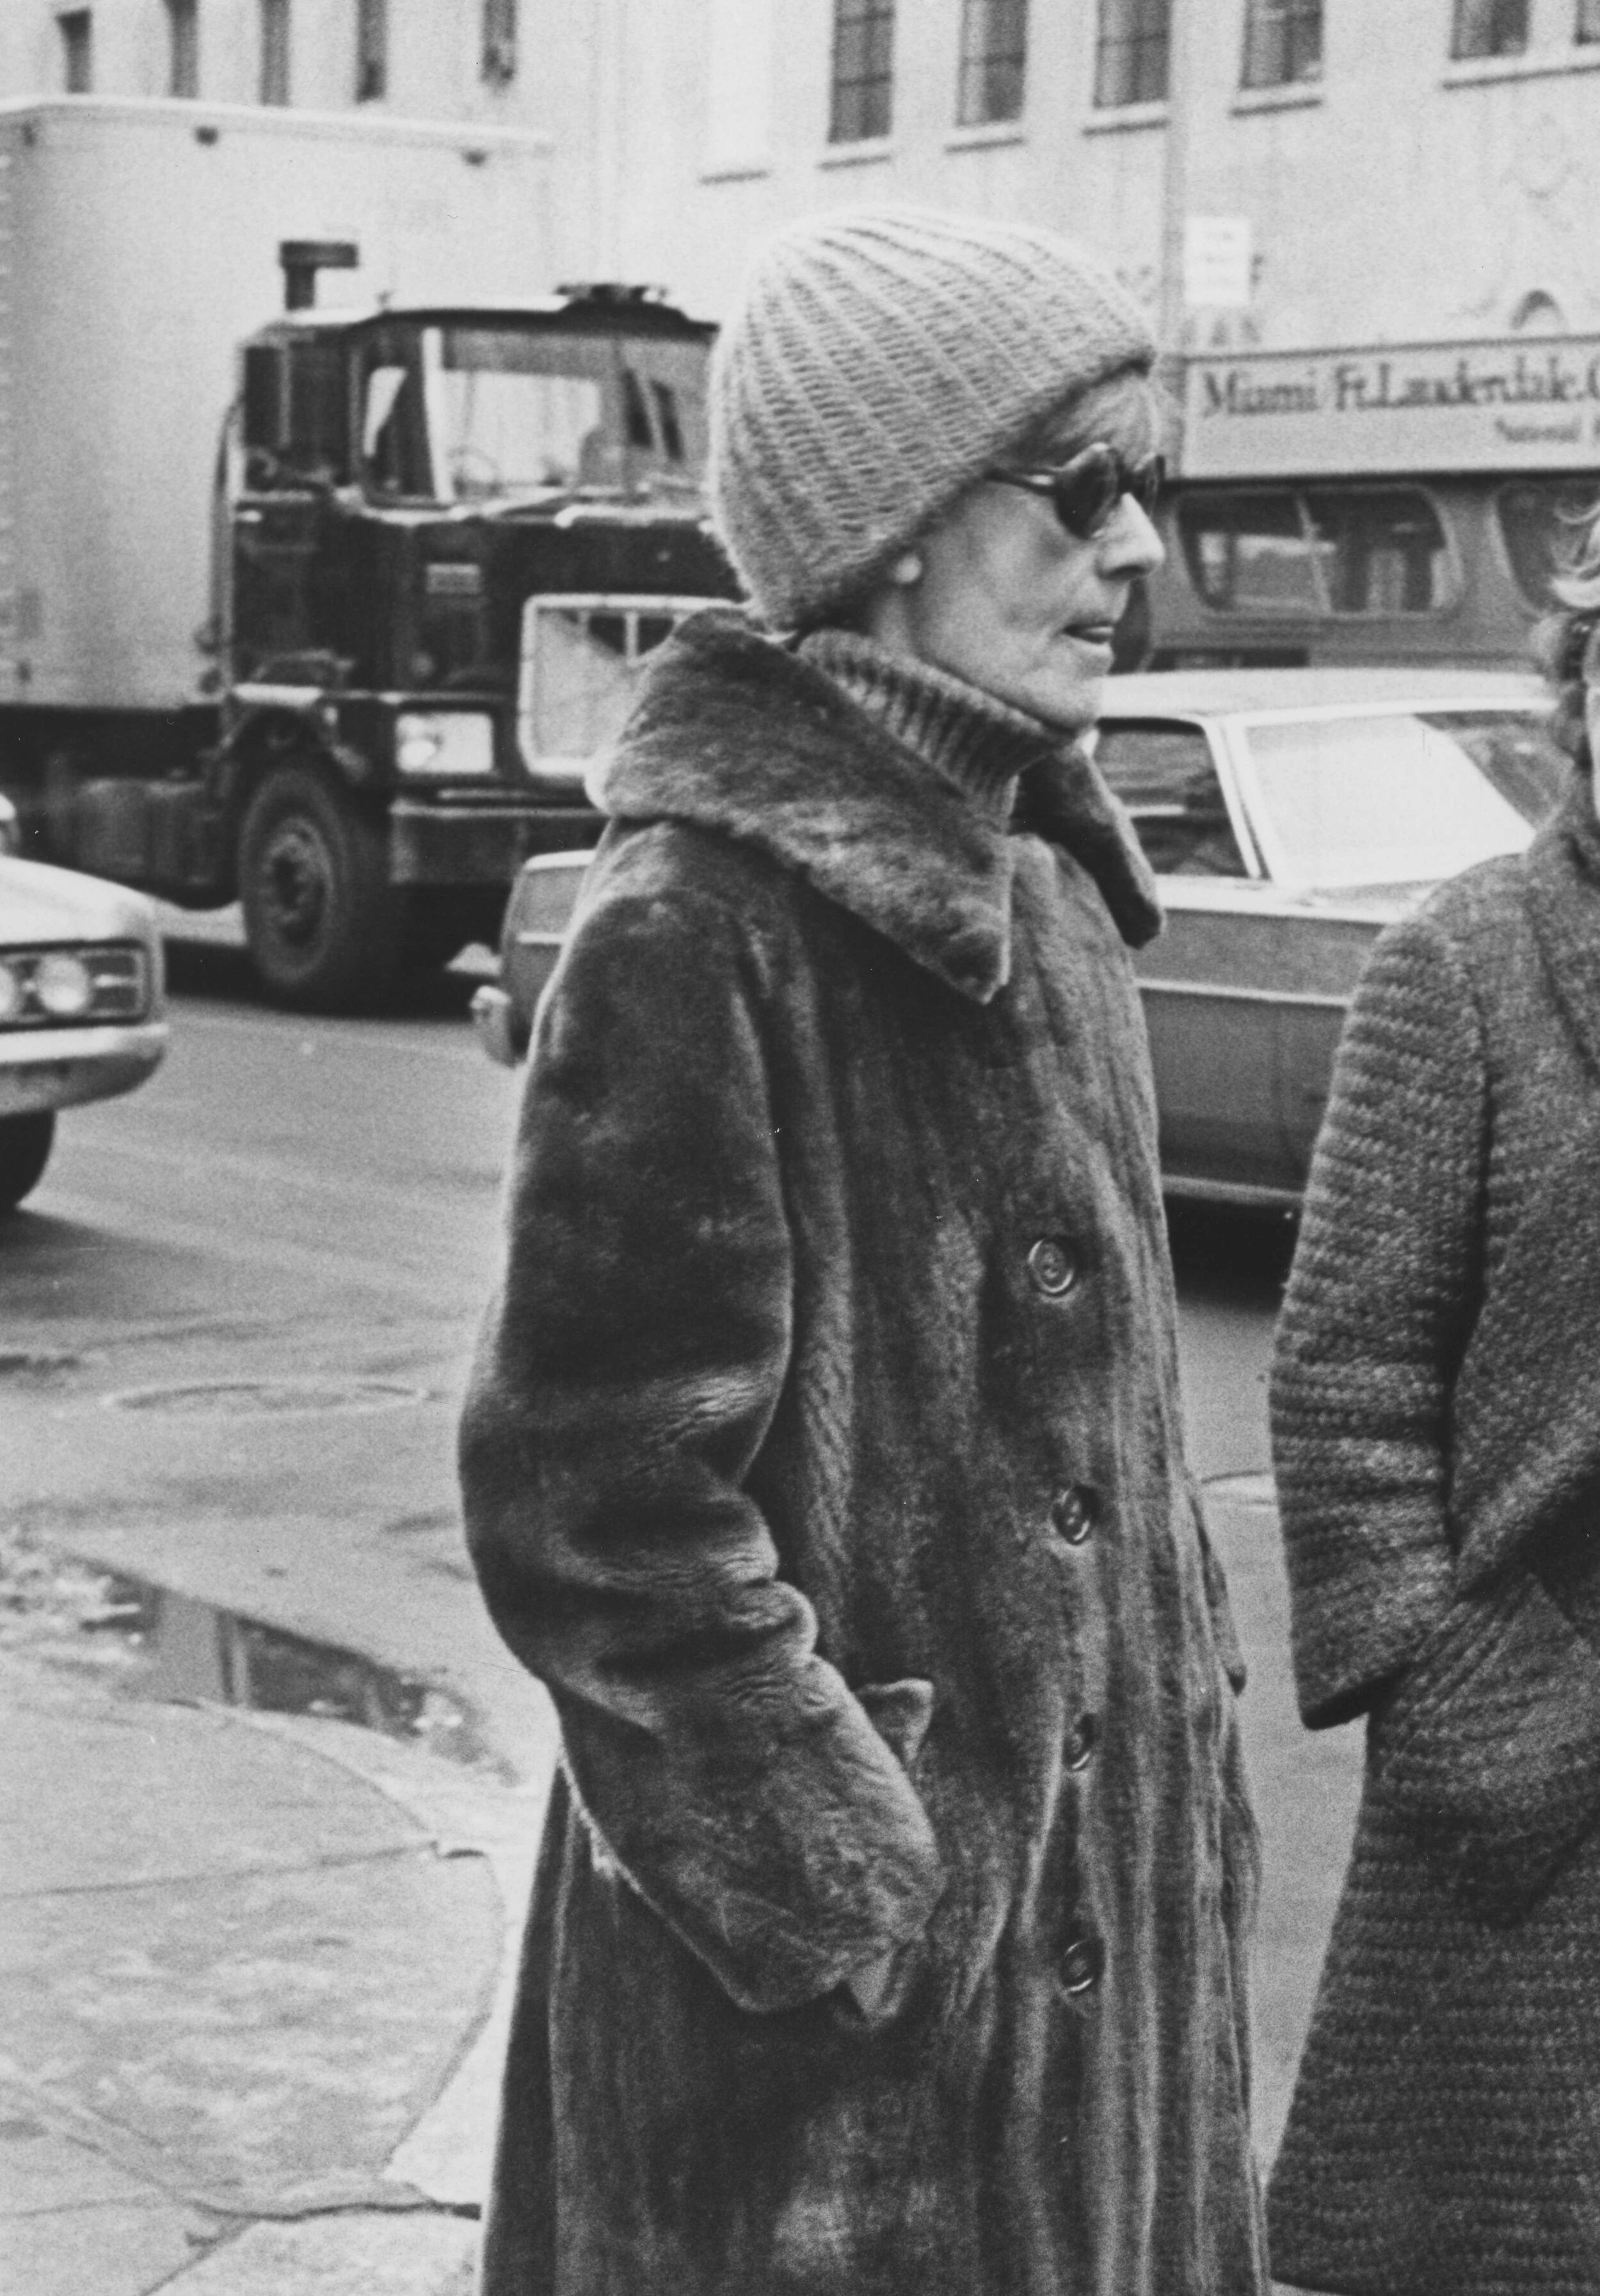 Image-3-Greta-Garbo-in-nutria-coat-NYC-1978--THE-TIMES-OF-BILL-CUNNINGHAM---Courtesy-of-Greenwich-Entertainment (1).jpg